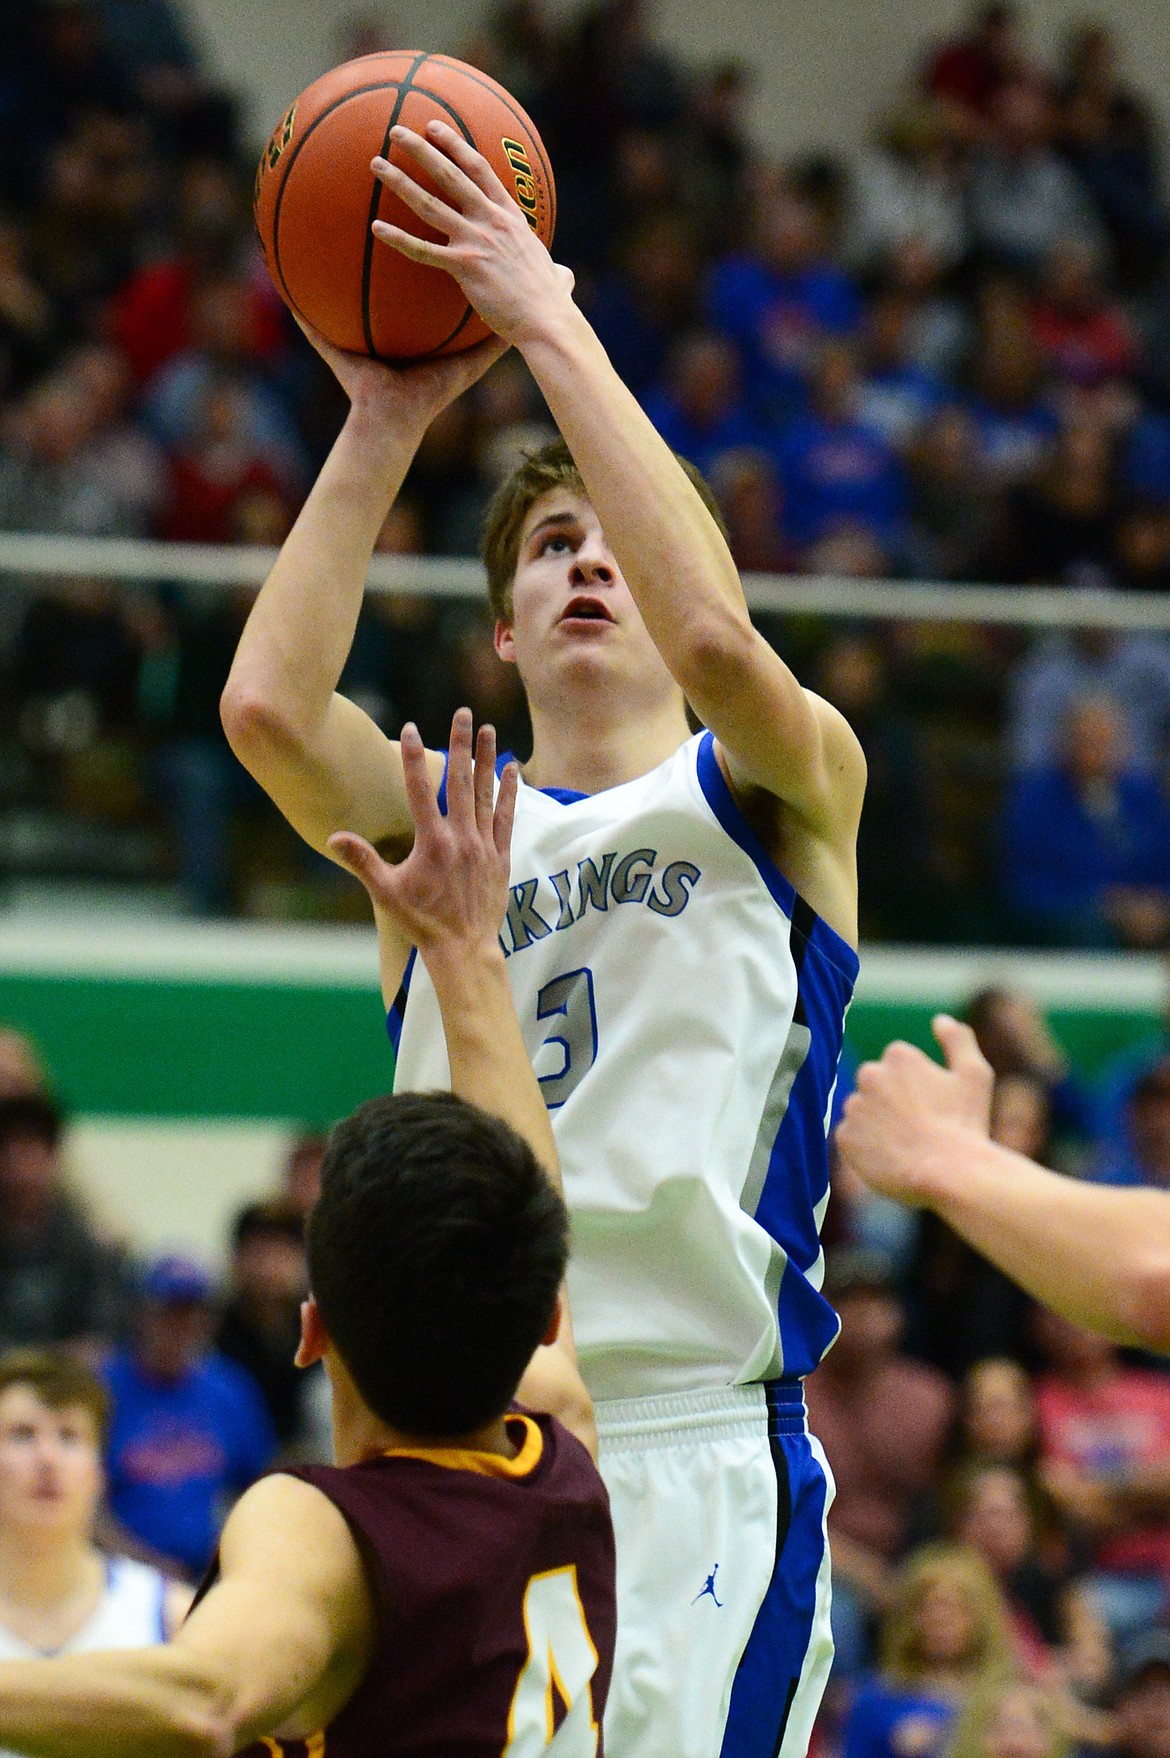 Bigfork's Colton Reichenbach (3) shoots over Poplar's Kenny Smoker (4) in the State Class B Boys' Basketball Tournament at the Belgrade Special Events Center in Belgrade on Thursday. (Casey Kreider/Daily Inter Lake)